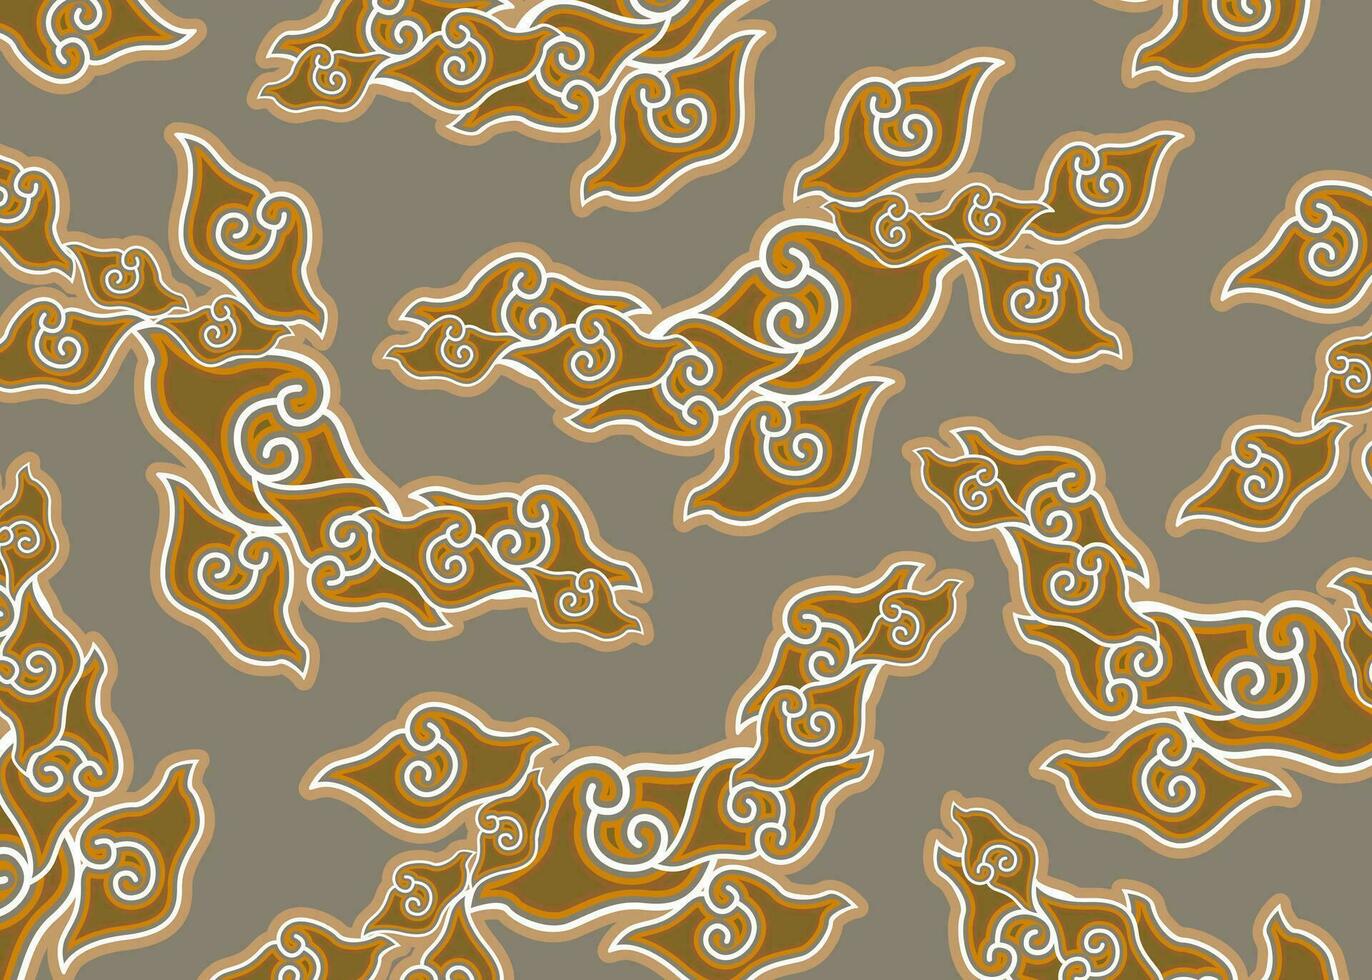 Mega Mendung motif, batik motif typical of West Java Indonesia, curved line pattern with cloud objects, with developments and various artistic colors, ethnics patterns textile asian wallpaper ornament vector